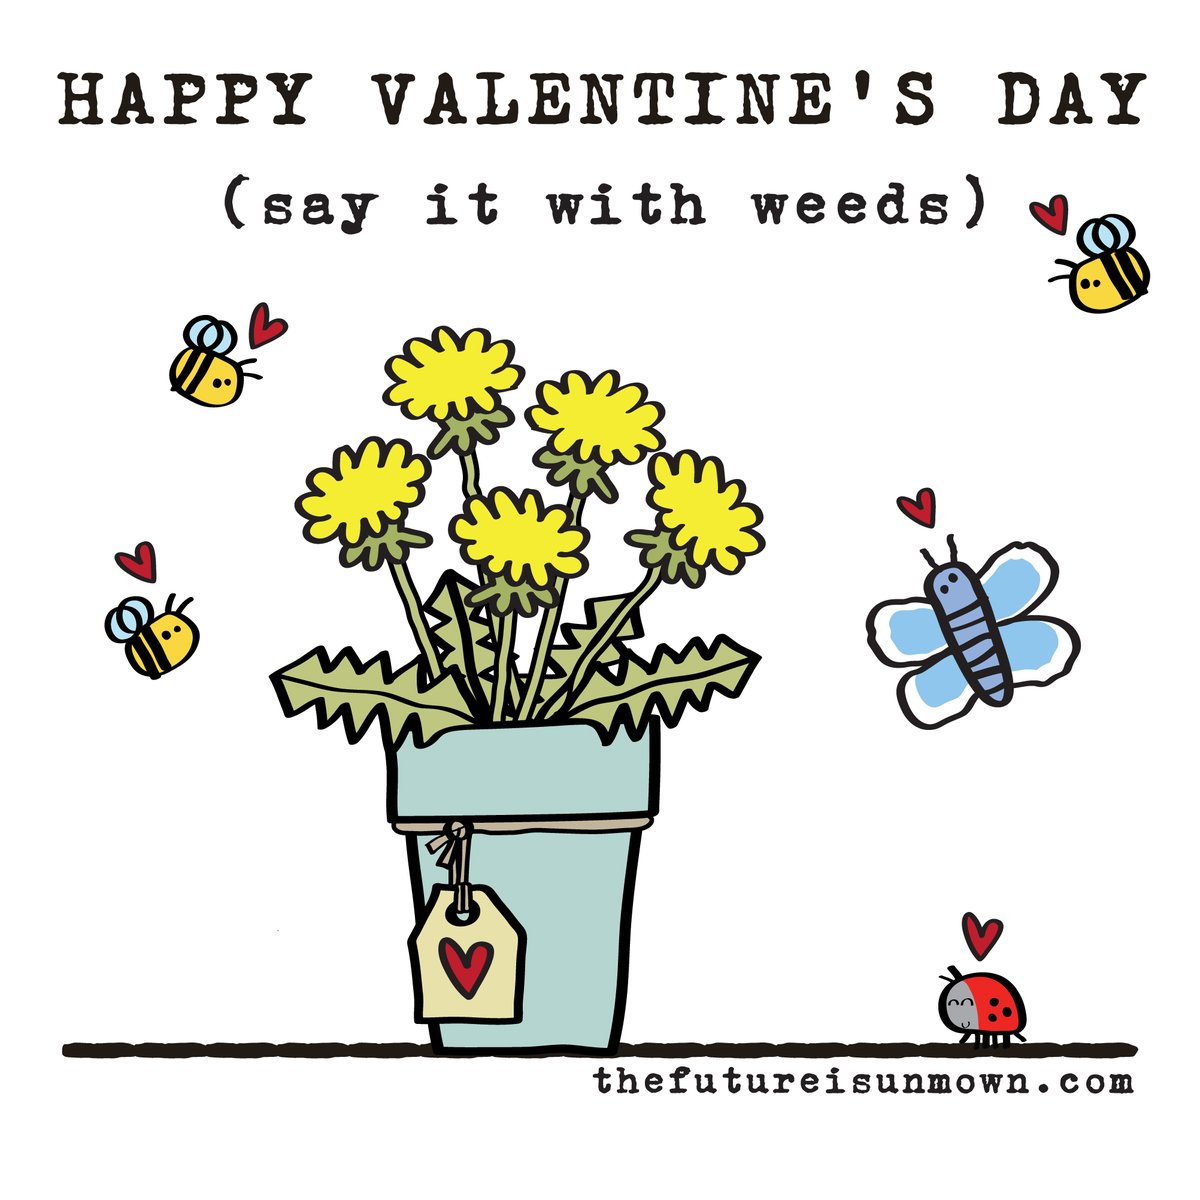 Have a very nice Valentine's Day indeed, from thefutureisunmown.com! x 

#ValentinesDay2022 #dandelions #weeds #wildlife #naturelovers #nature #bees #HappyValentinesDay #rewild #rewilding #wildifegarden #loveisintheair